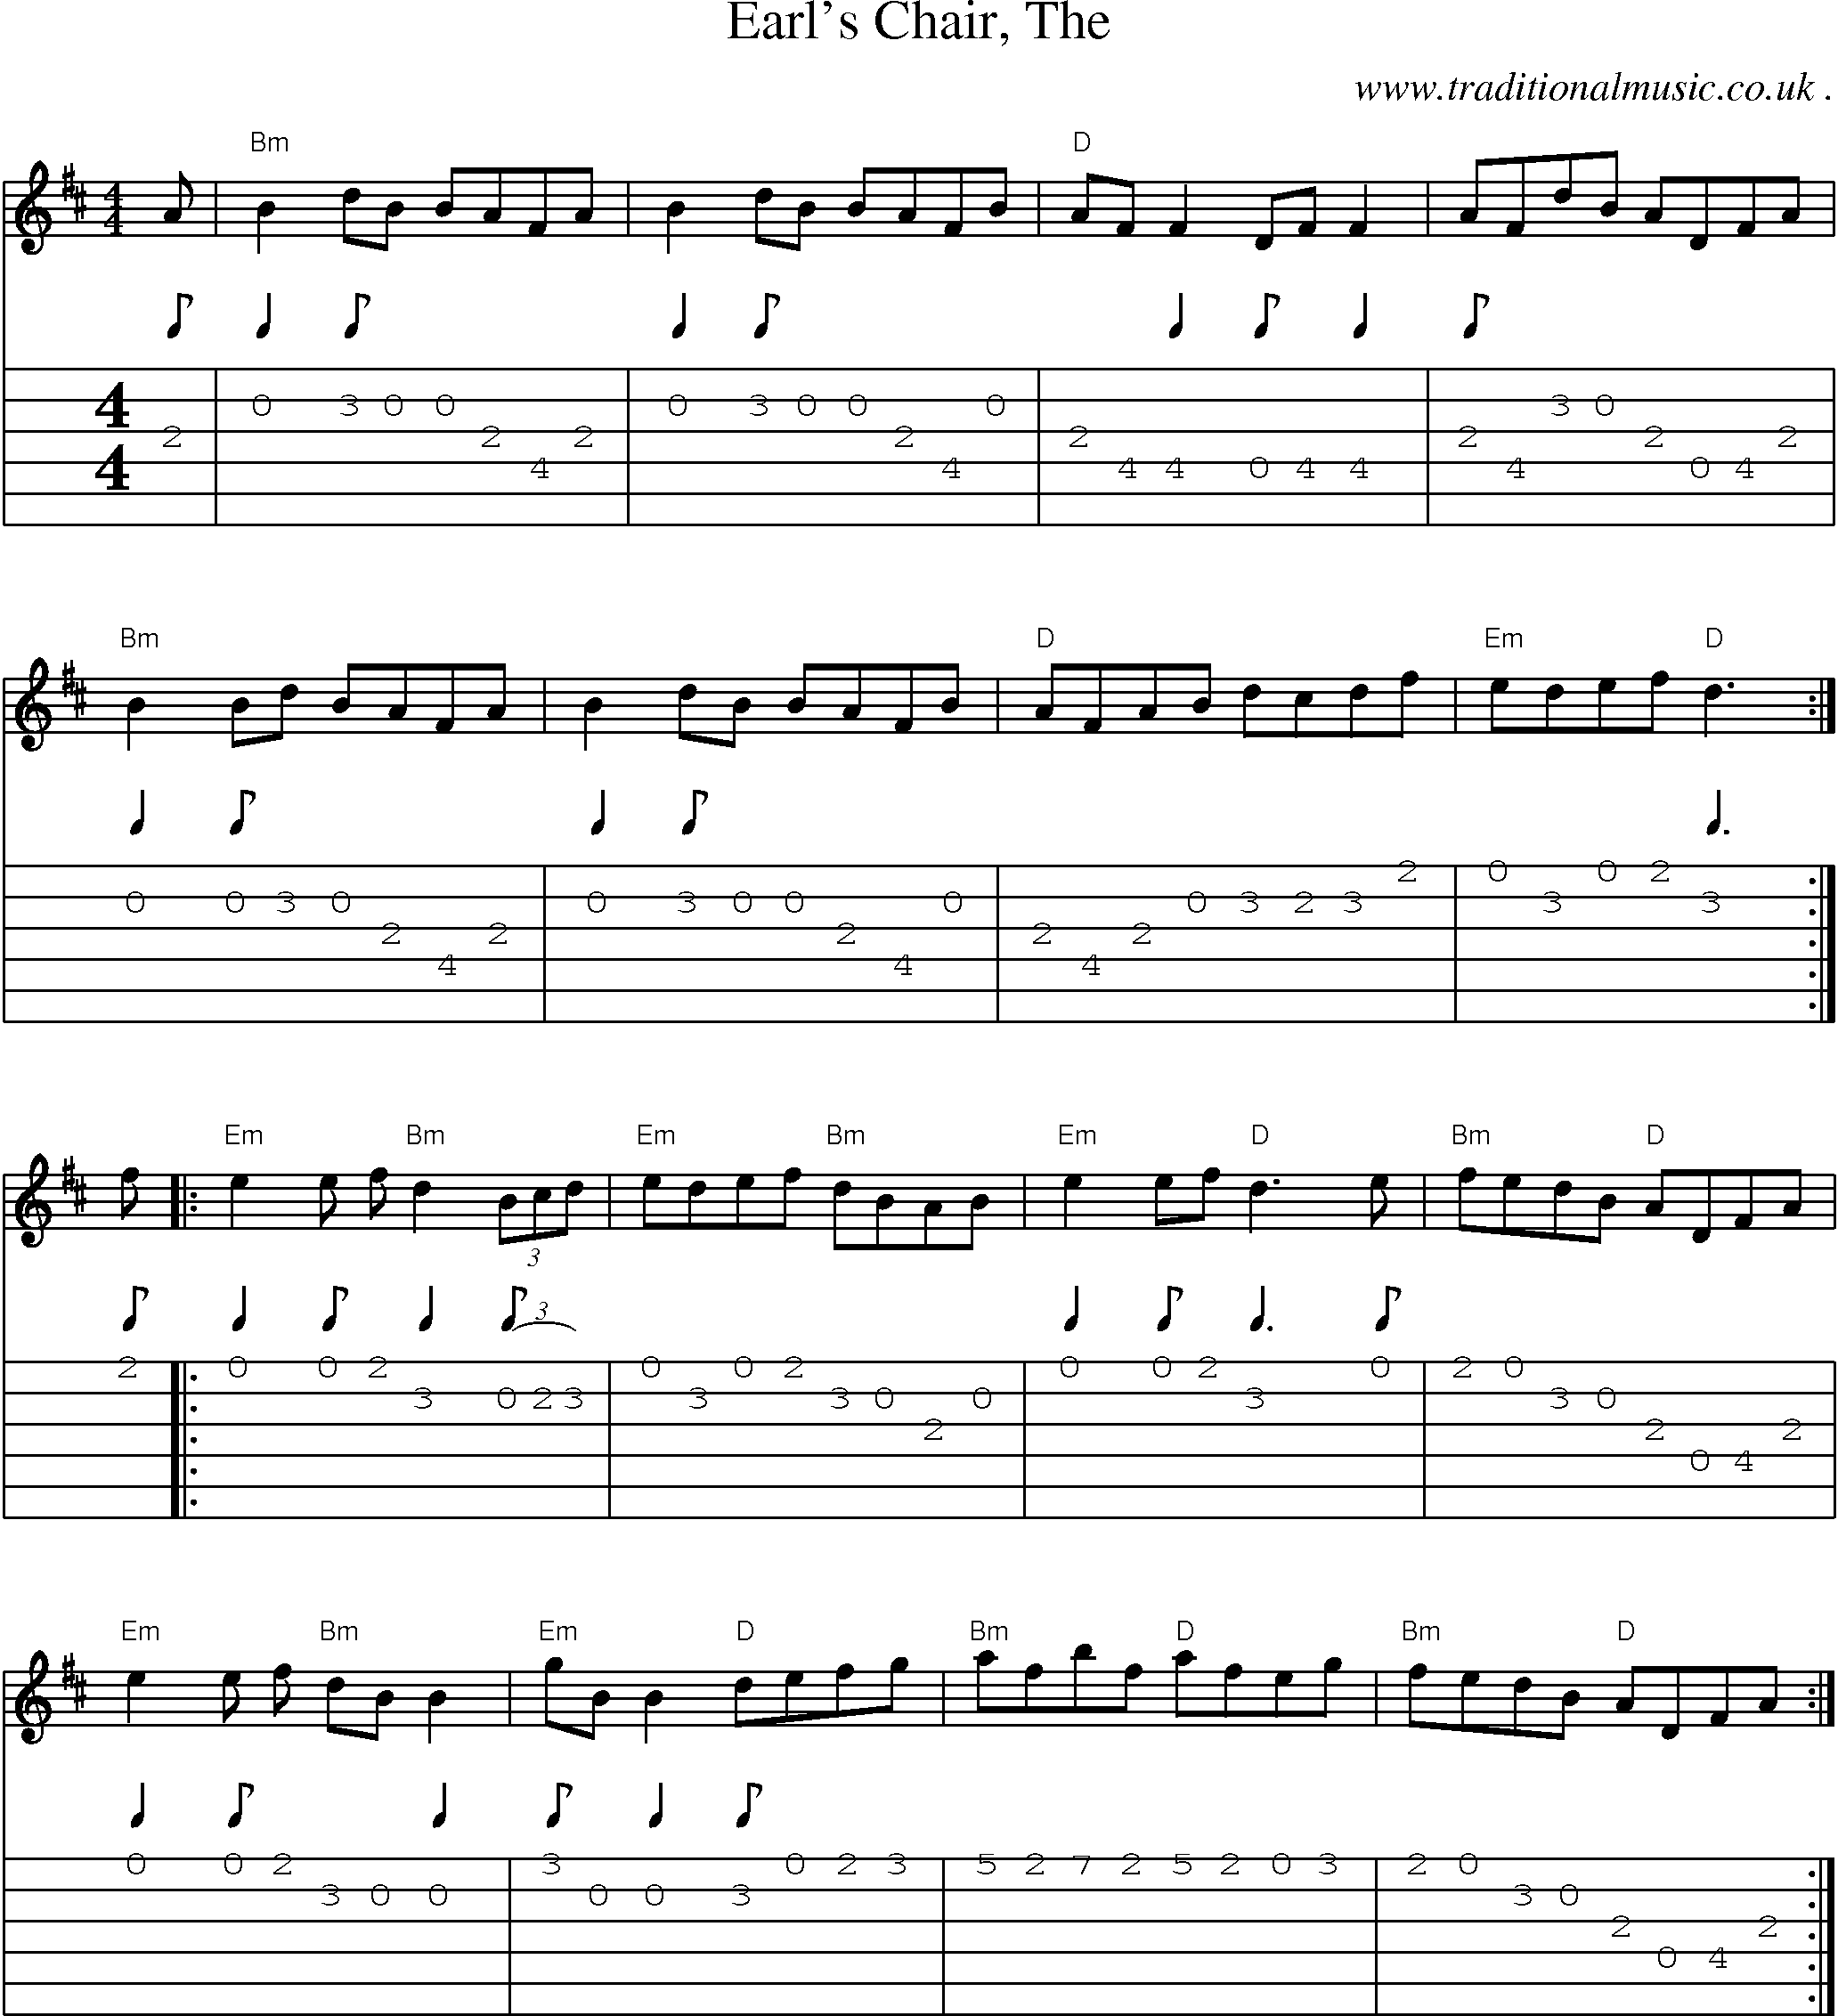 Music Score and Guitar Tabs for Earls Chair The